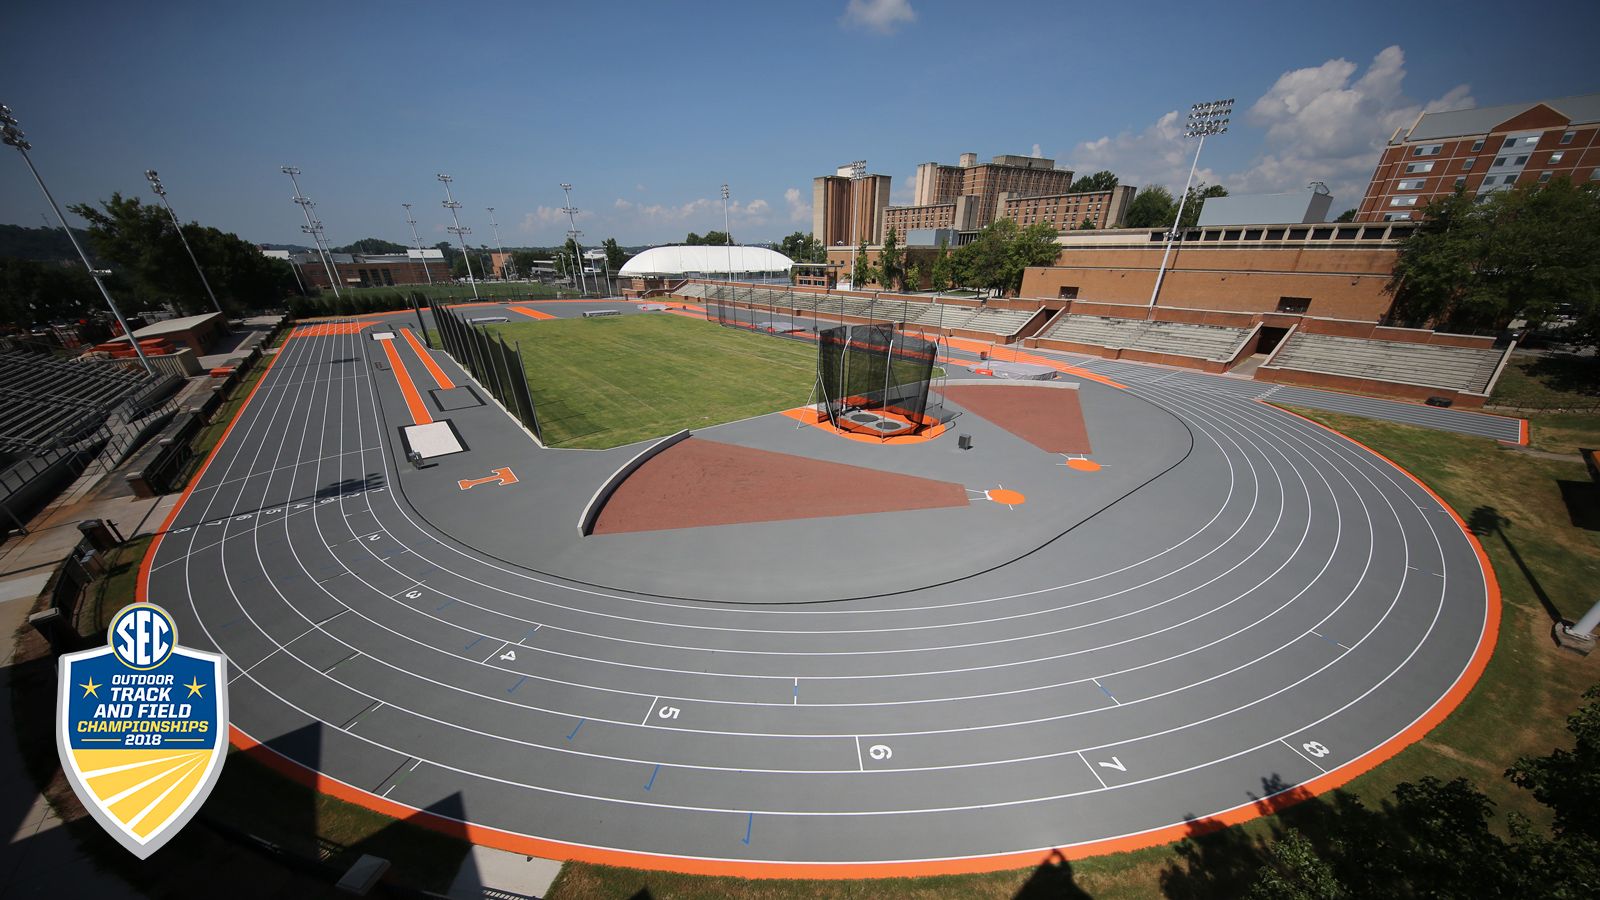 SEC Track and Field Championships to begin Friday